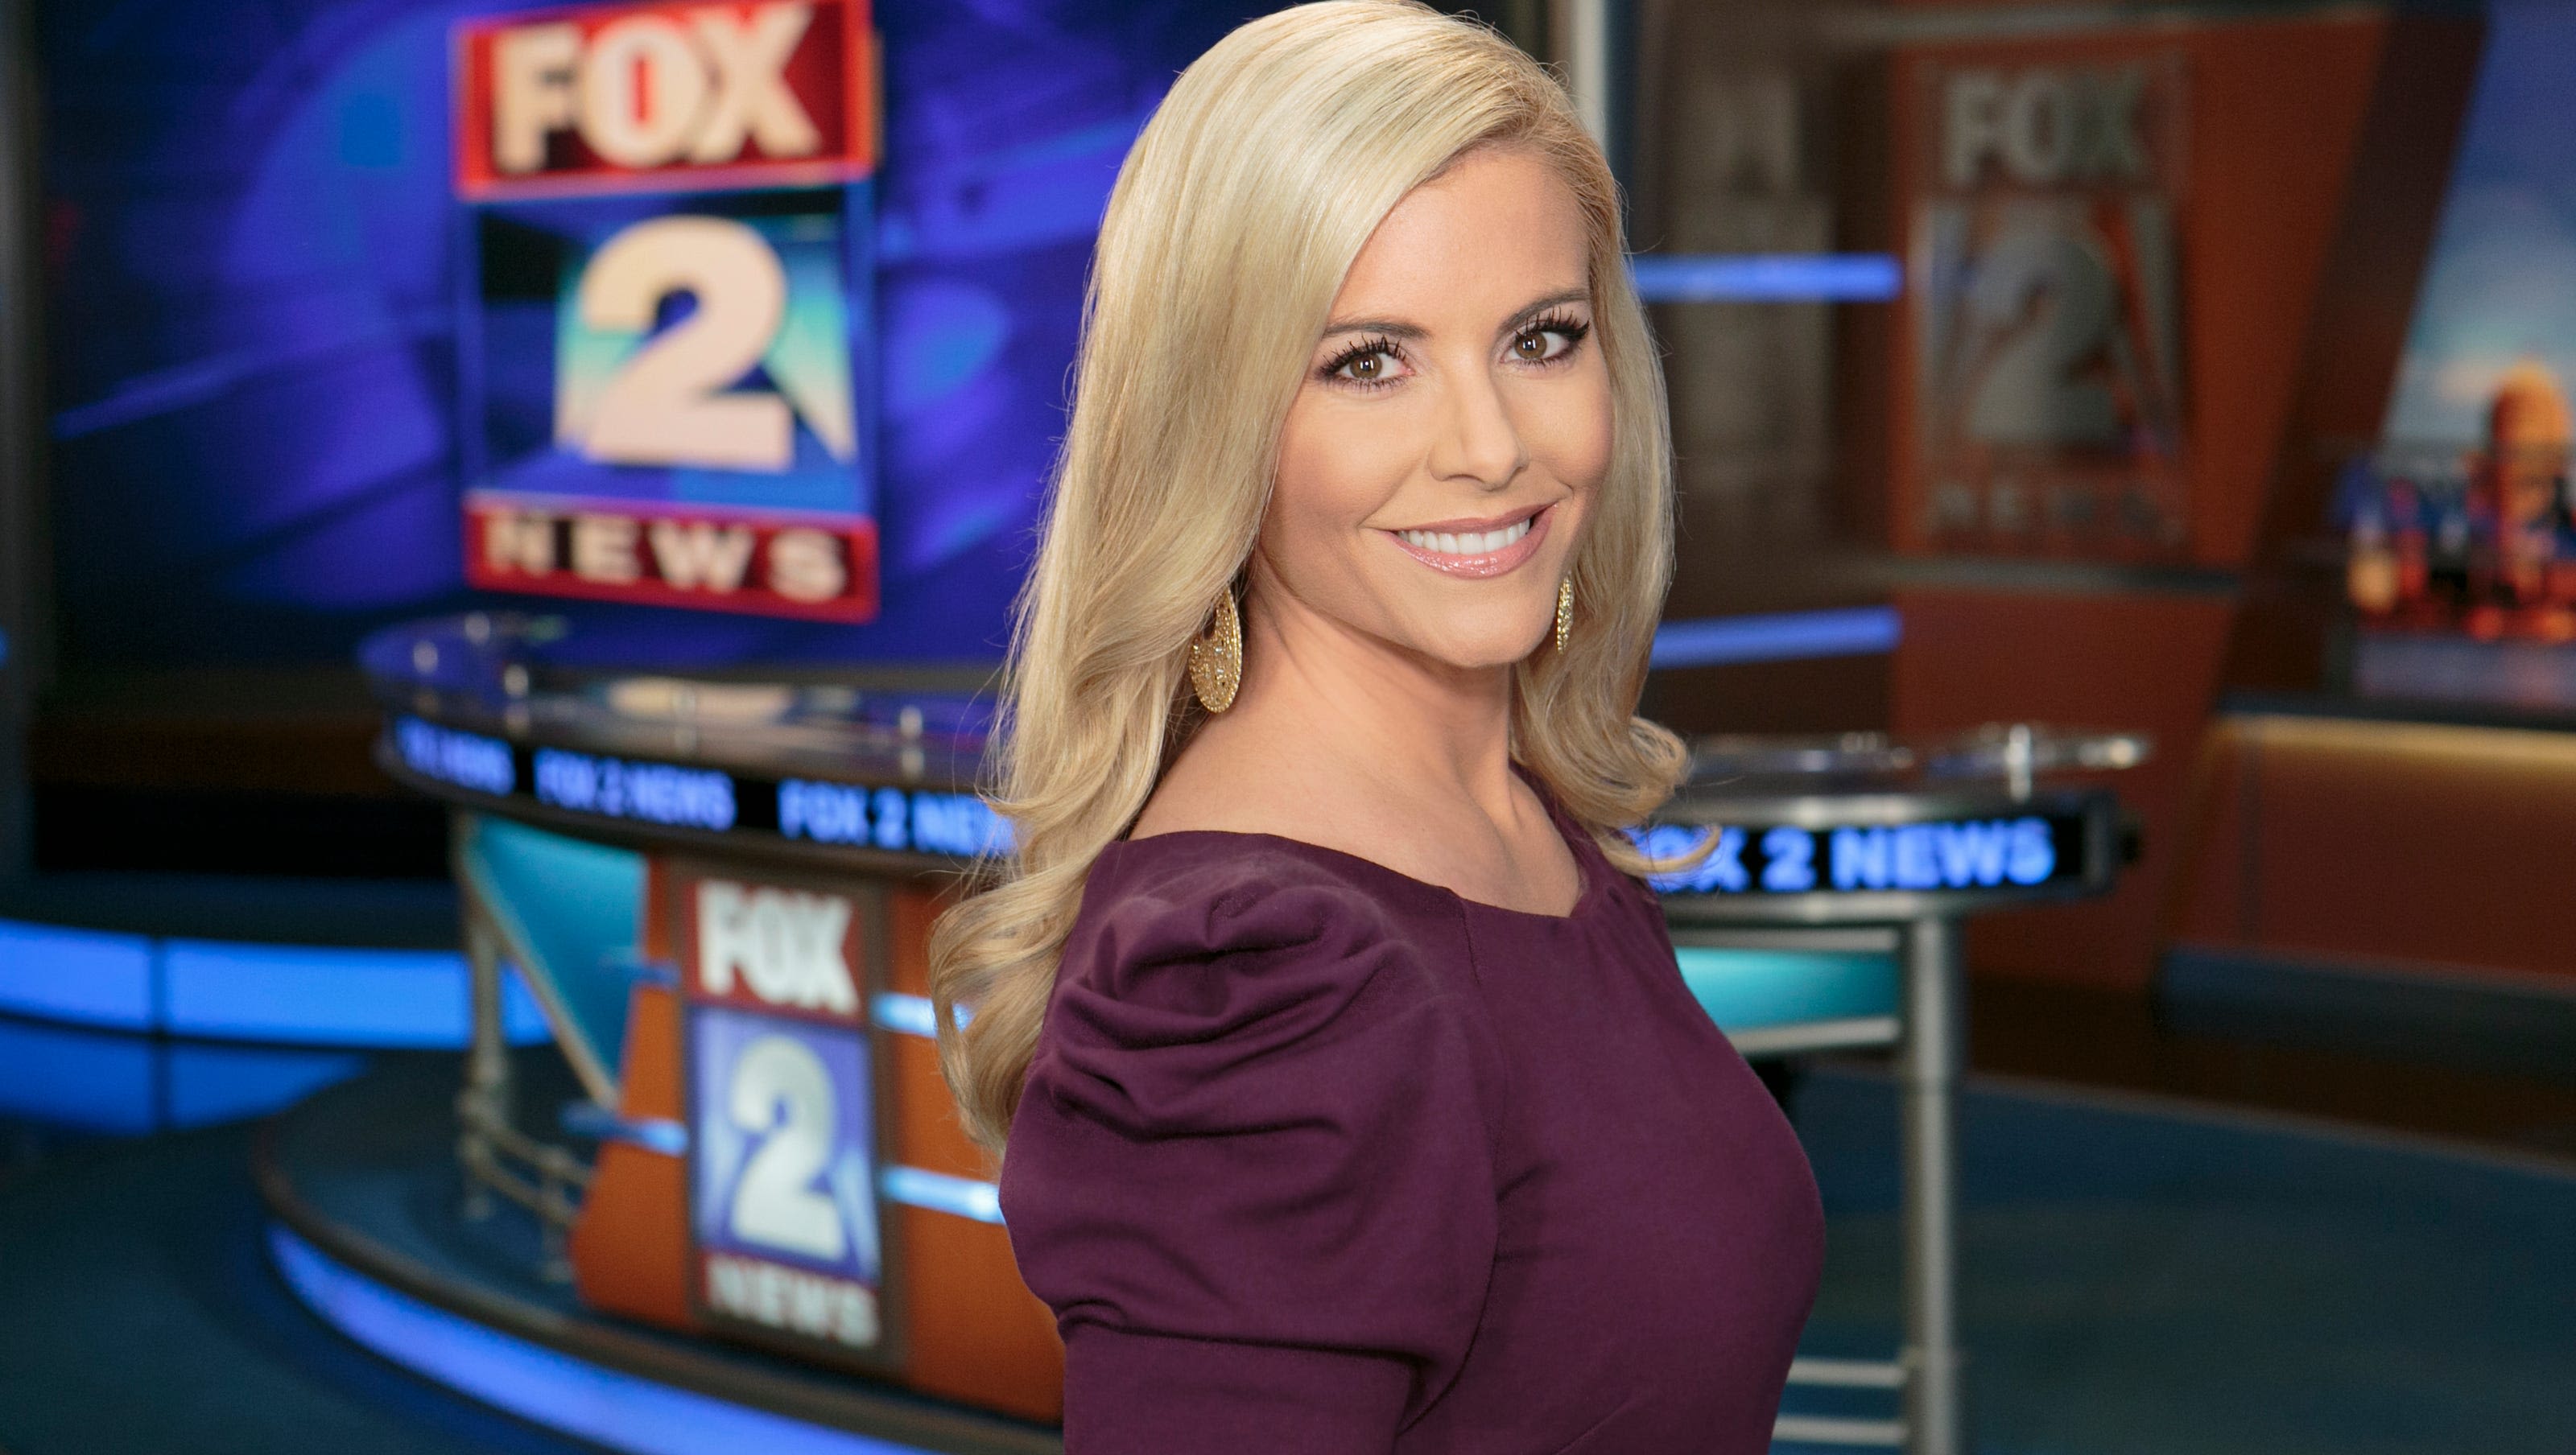 Fox 2 anchor Amy Andrews takes medical leave for depression, anxiety